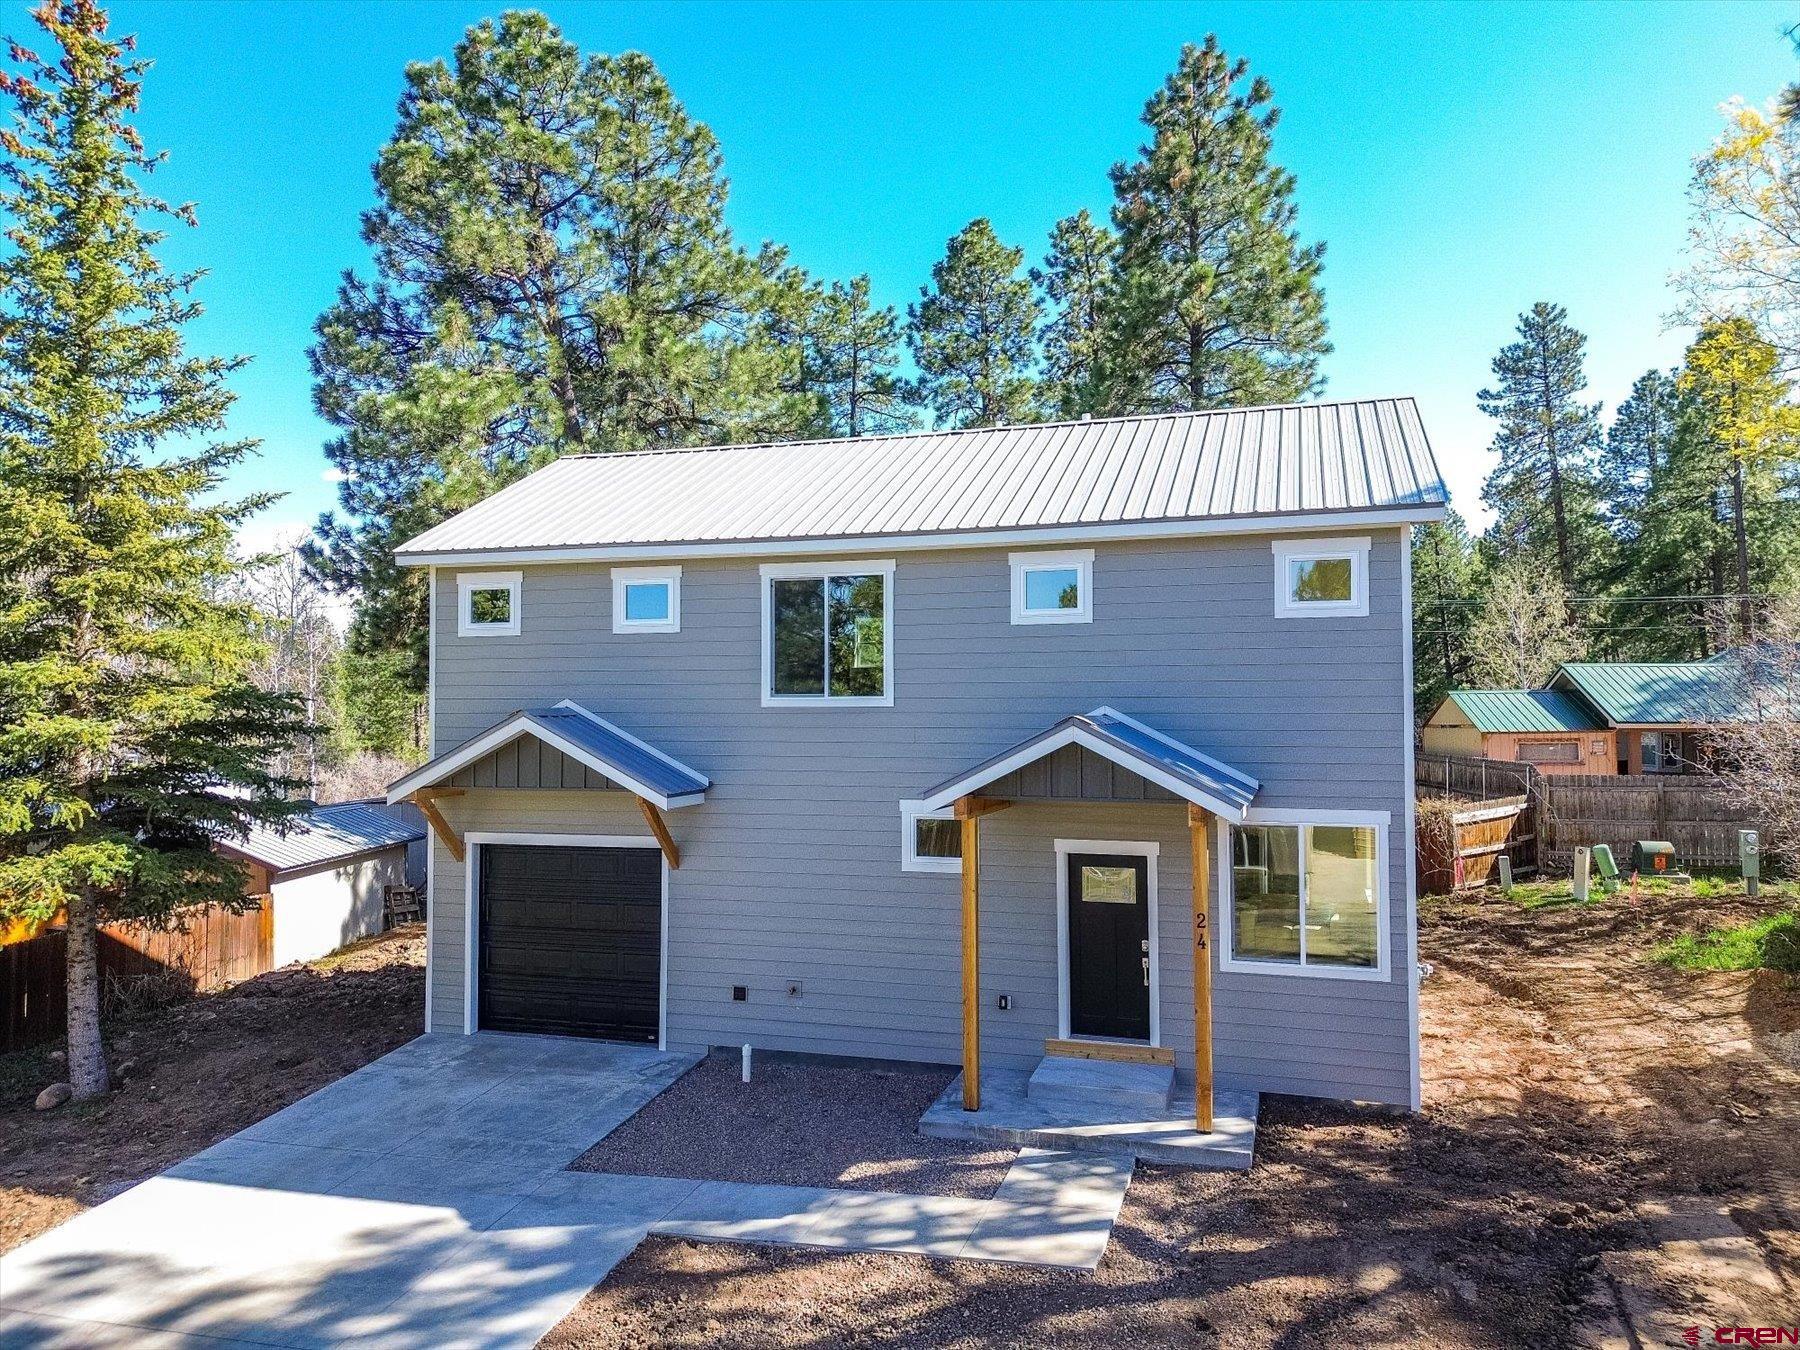 Photo of 24 Timber Dr in Durango, CO